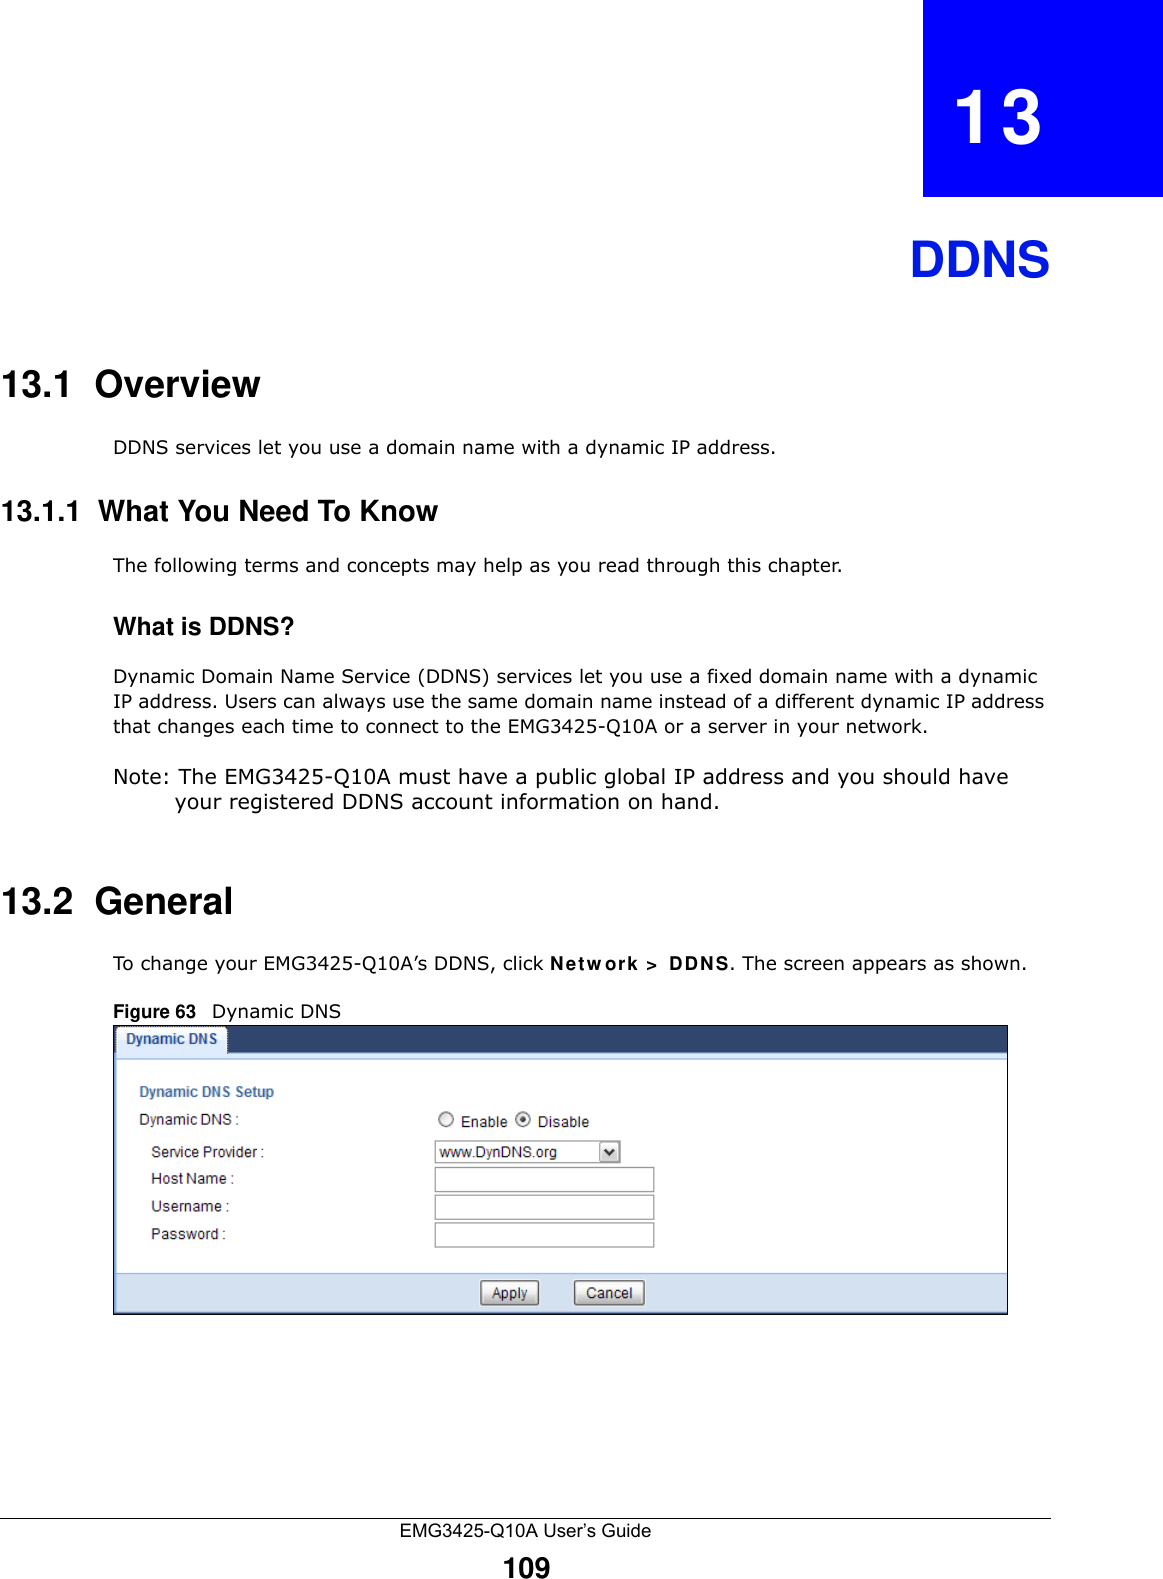 EMG3425-Q10A User’s Guide109CHAPTER   13DDNS13.1  Overview DDNS services let you use a domain name with a dynamic IP address.13.1.1  What You Need To KnowThe following terms and concepts may help as you read through this chapter.What is DDNS?Dynamic Domain Name Service (DDNS) services let you use a fixed domain name with a dynamic IP address. Users can always use the same domain name instead of a different dynamic IP address that changes each time to connect to the EMG3425-Q10A or a server in your network.Note: The EMG3425-Q10A must have a public global IP address and you should have your registered DDNS account information on hand.13.2  General   To change your EMG3425-Q10A’s DDNS, click Ne t w ork &gt;  DDNS. The screen appears as shown.Figure 63   Dynamic DNS